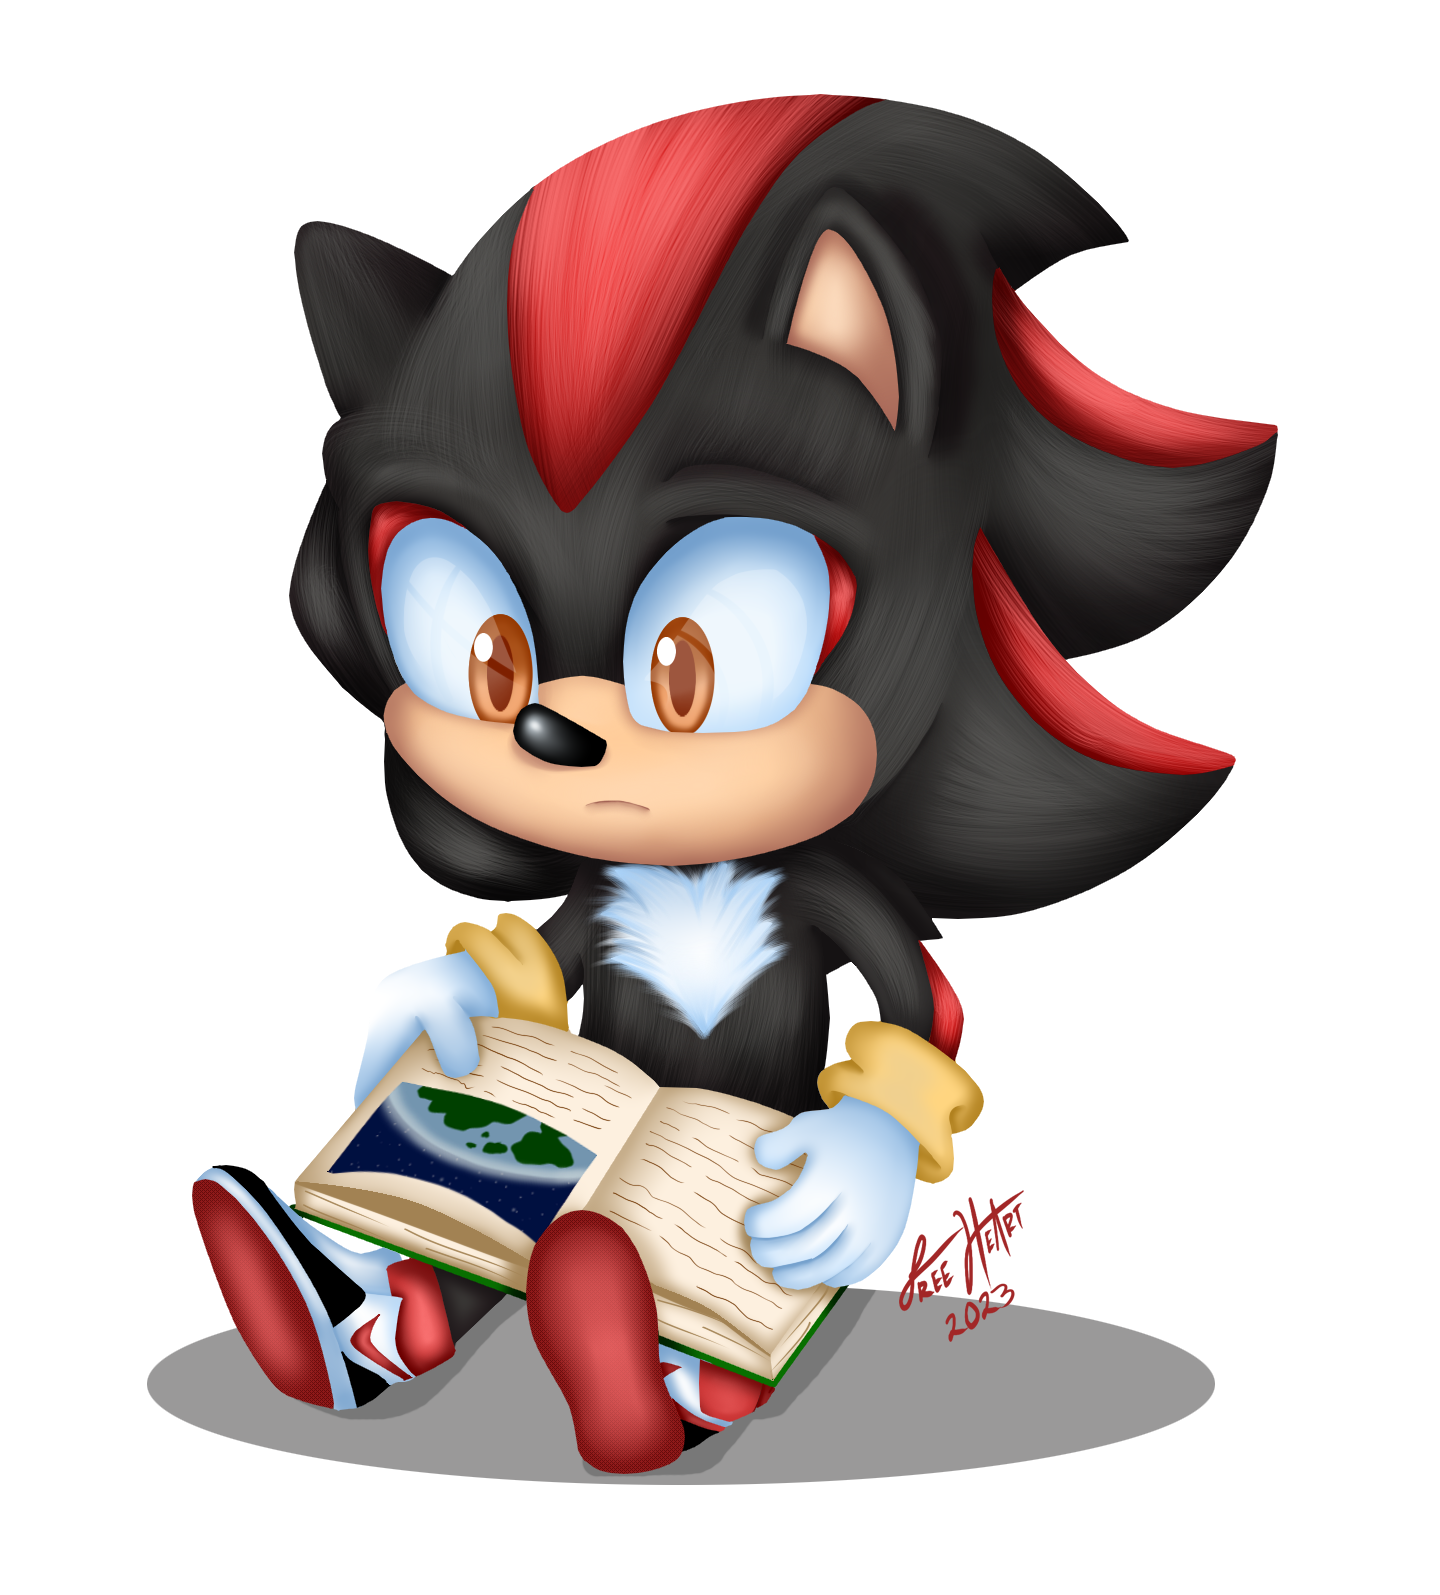 Shadow in Sonic X by FreeHeart44 on DeviantArt